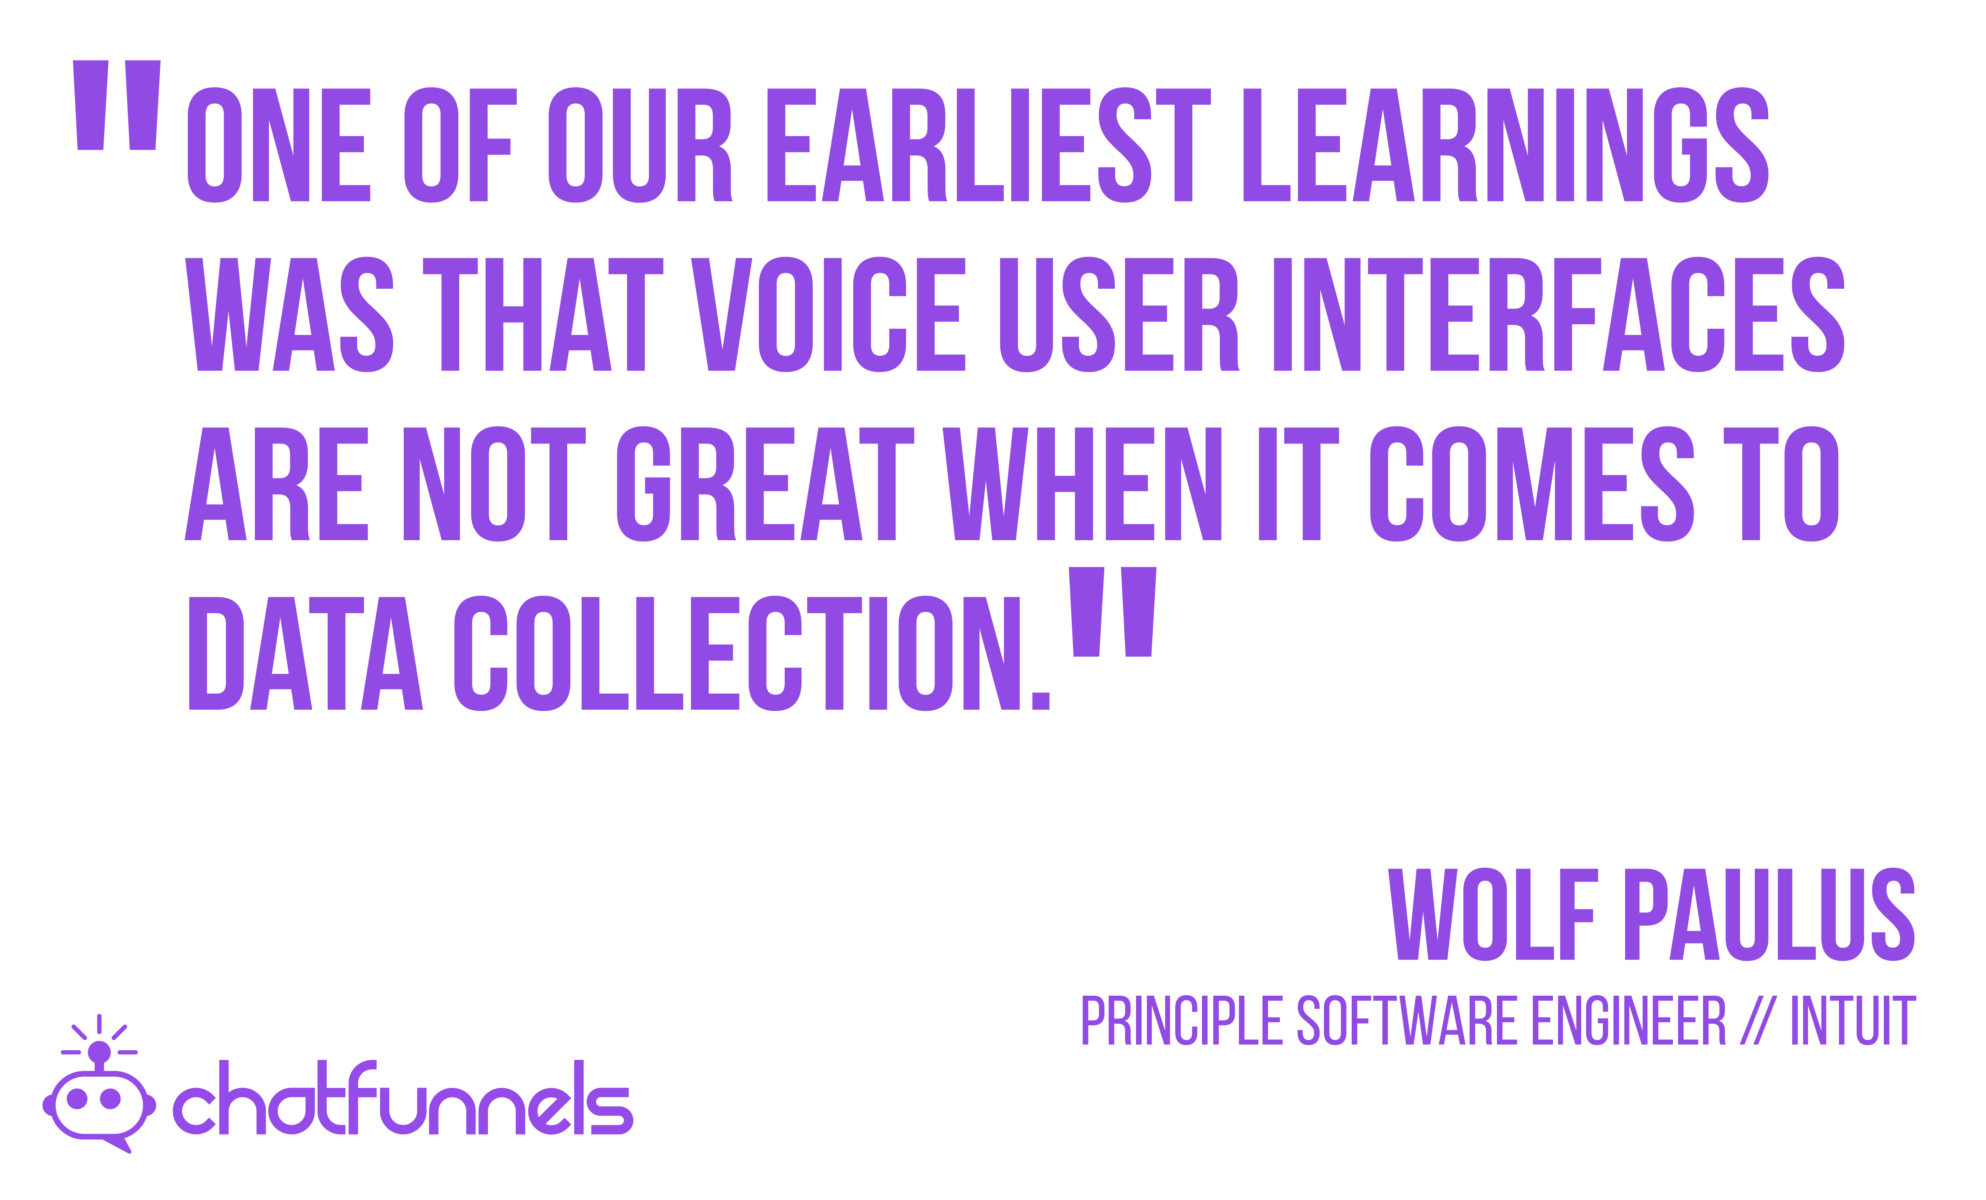 One of our earliest learnings was that voice user interfaces are not great when it comes to data collection.